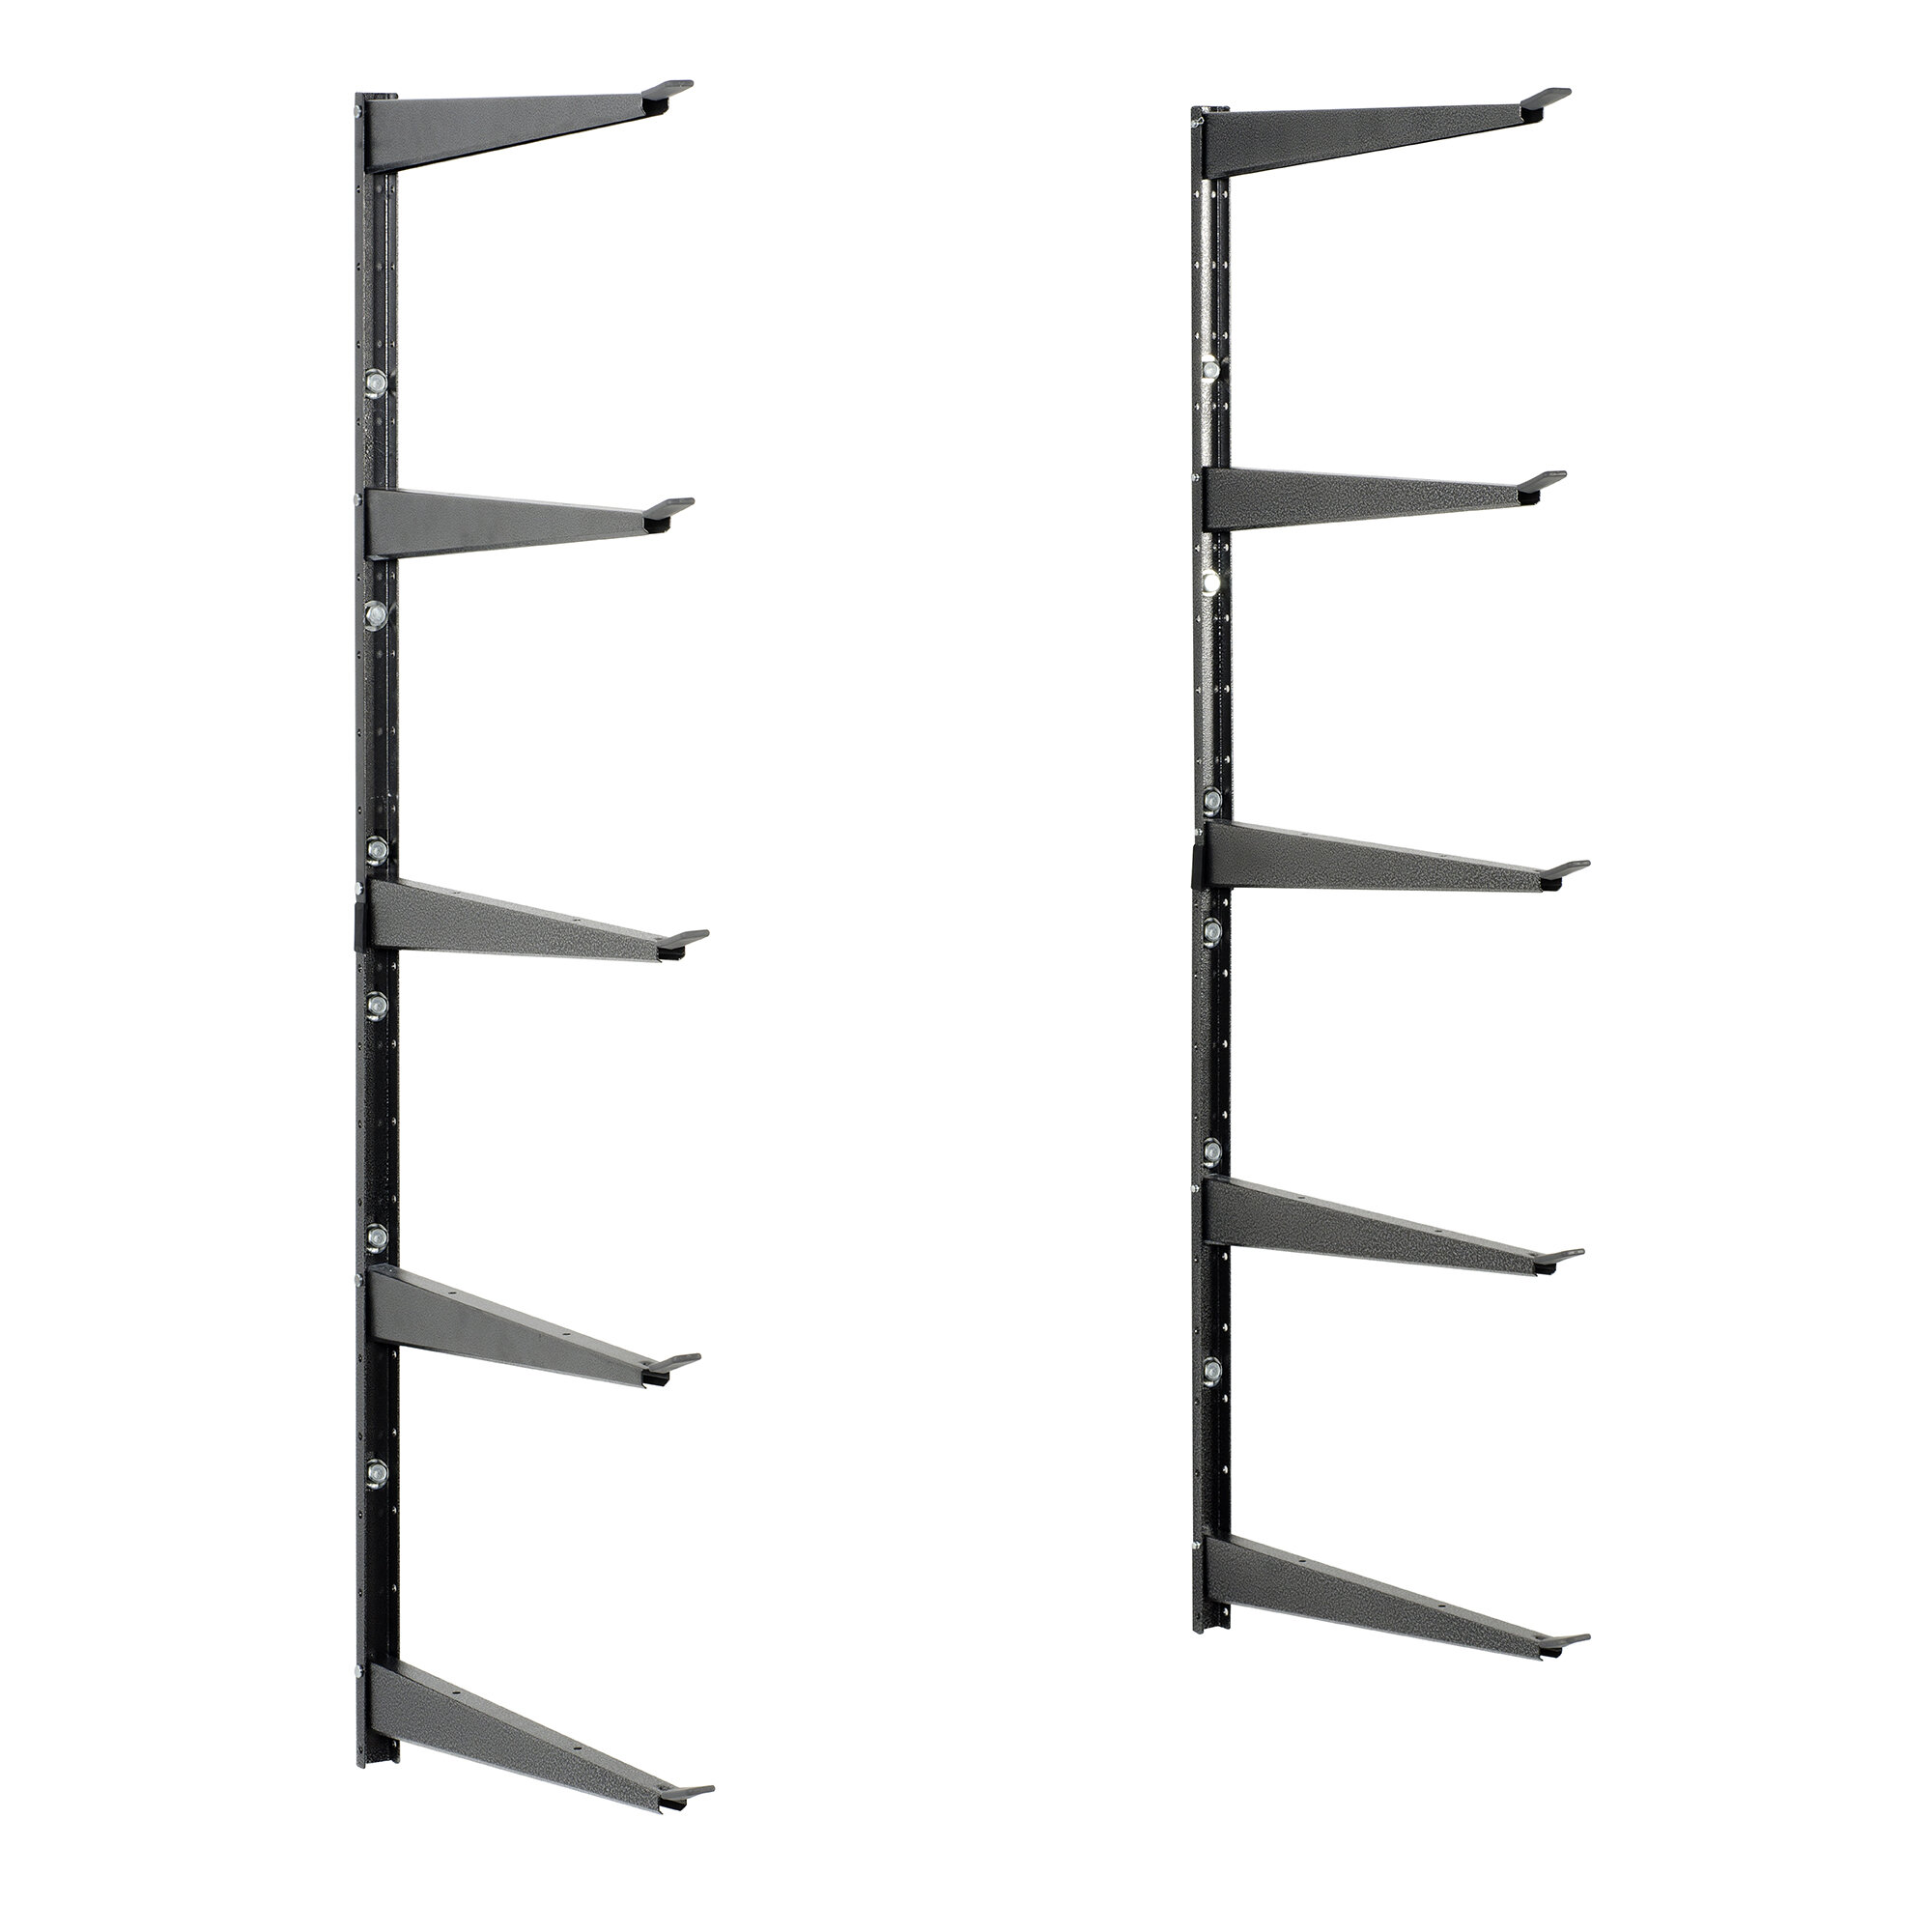 Delta Cycle 5-Tier Heavy Duty Steel Garage Storage Rack and Lumber Rack, Adjustable Shelves, Holds Up to 800 lbs, Adult